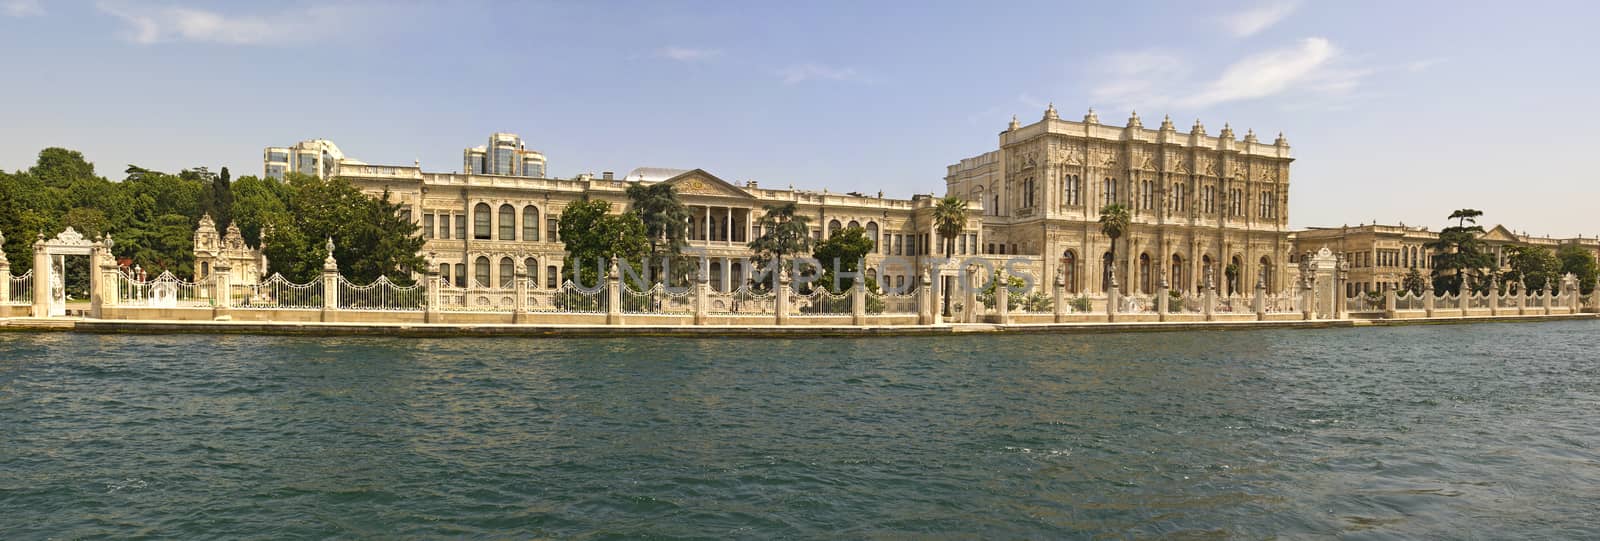 Large palace in Istanbul, Turkey on the edge of the Bosphorus river